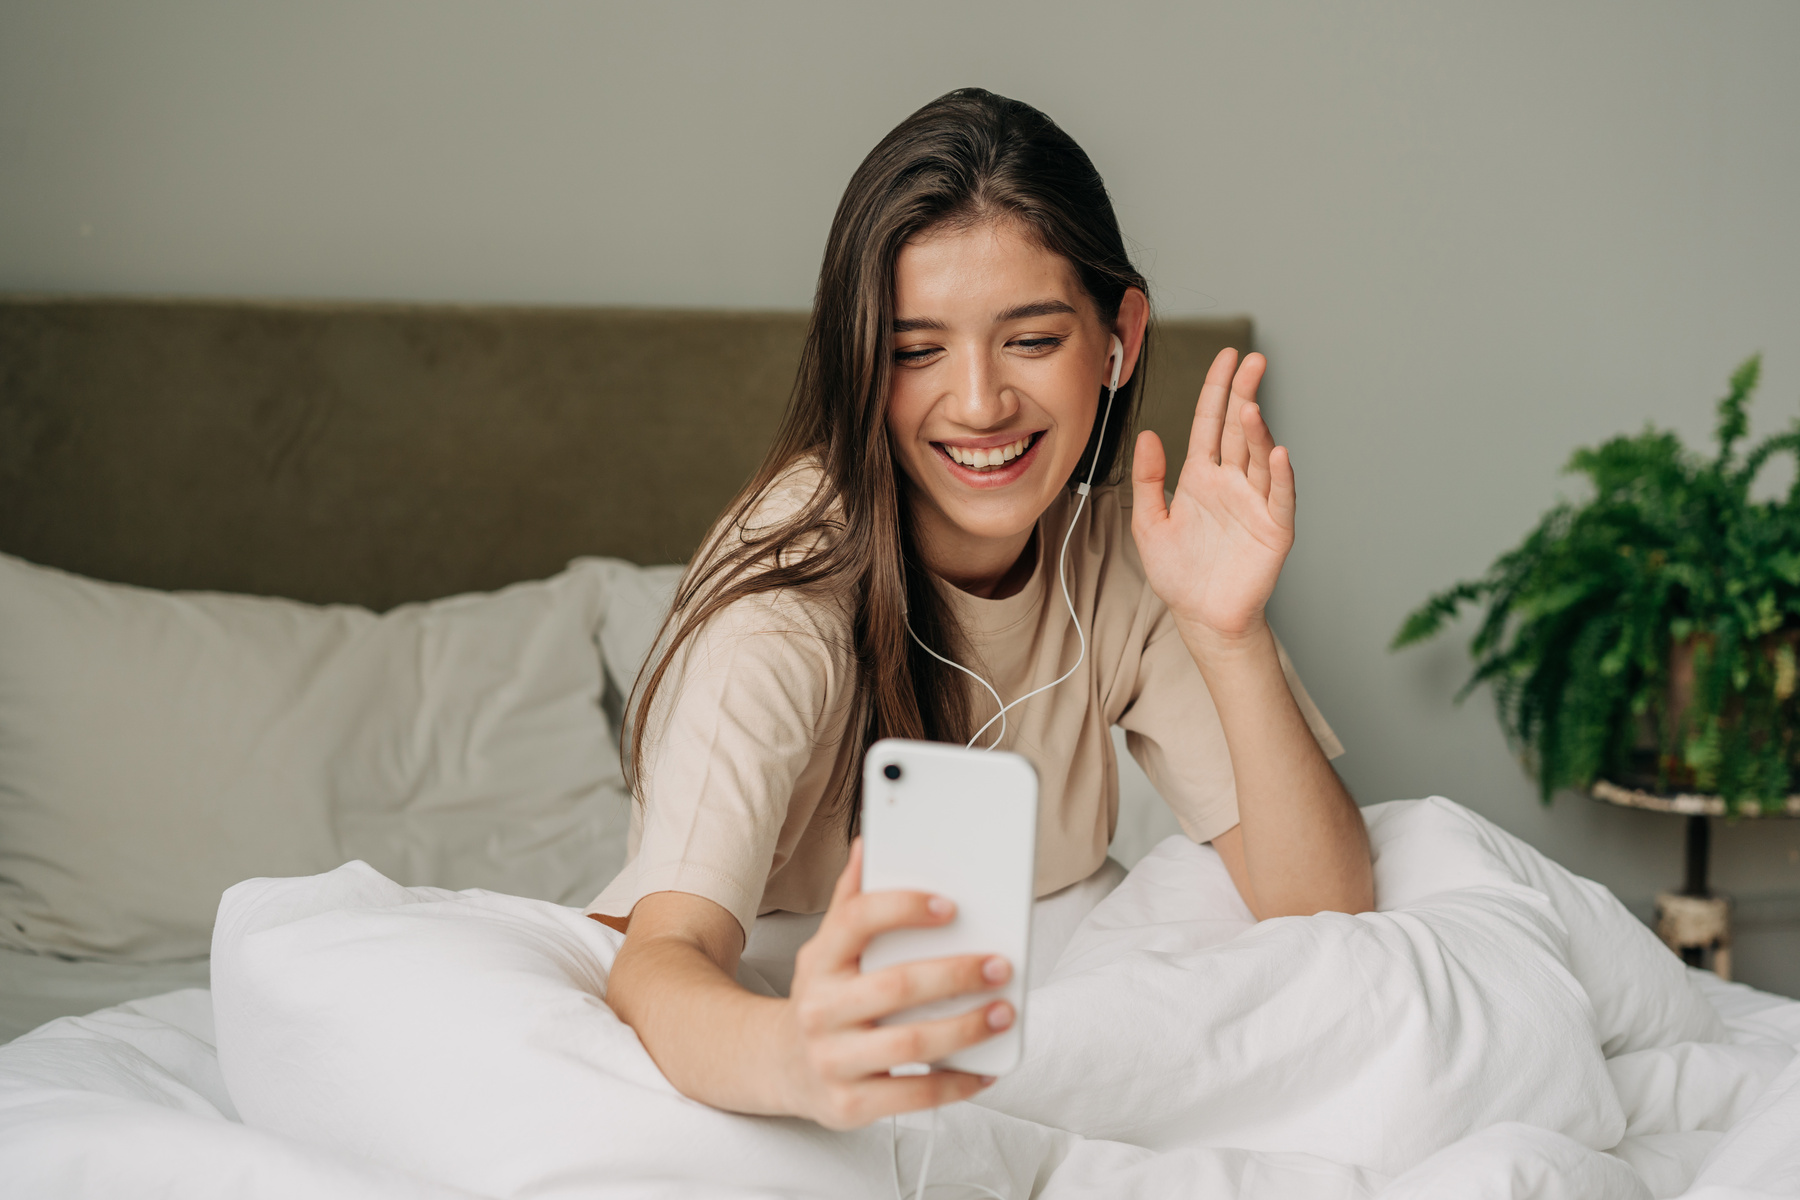 Woman Sitting on Bed after Waking up and Talking on Video Call Using Mobile Phone and Headphones